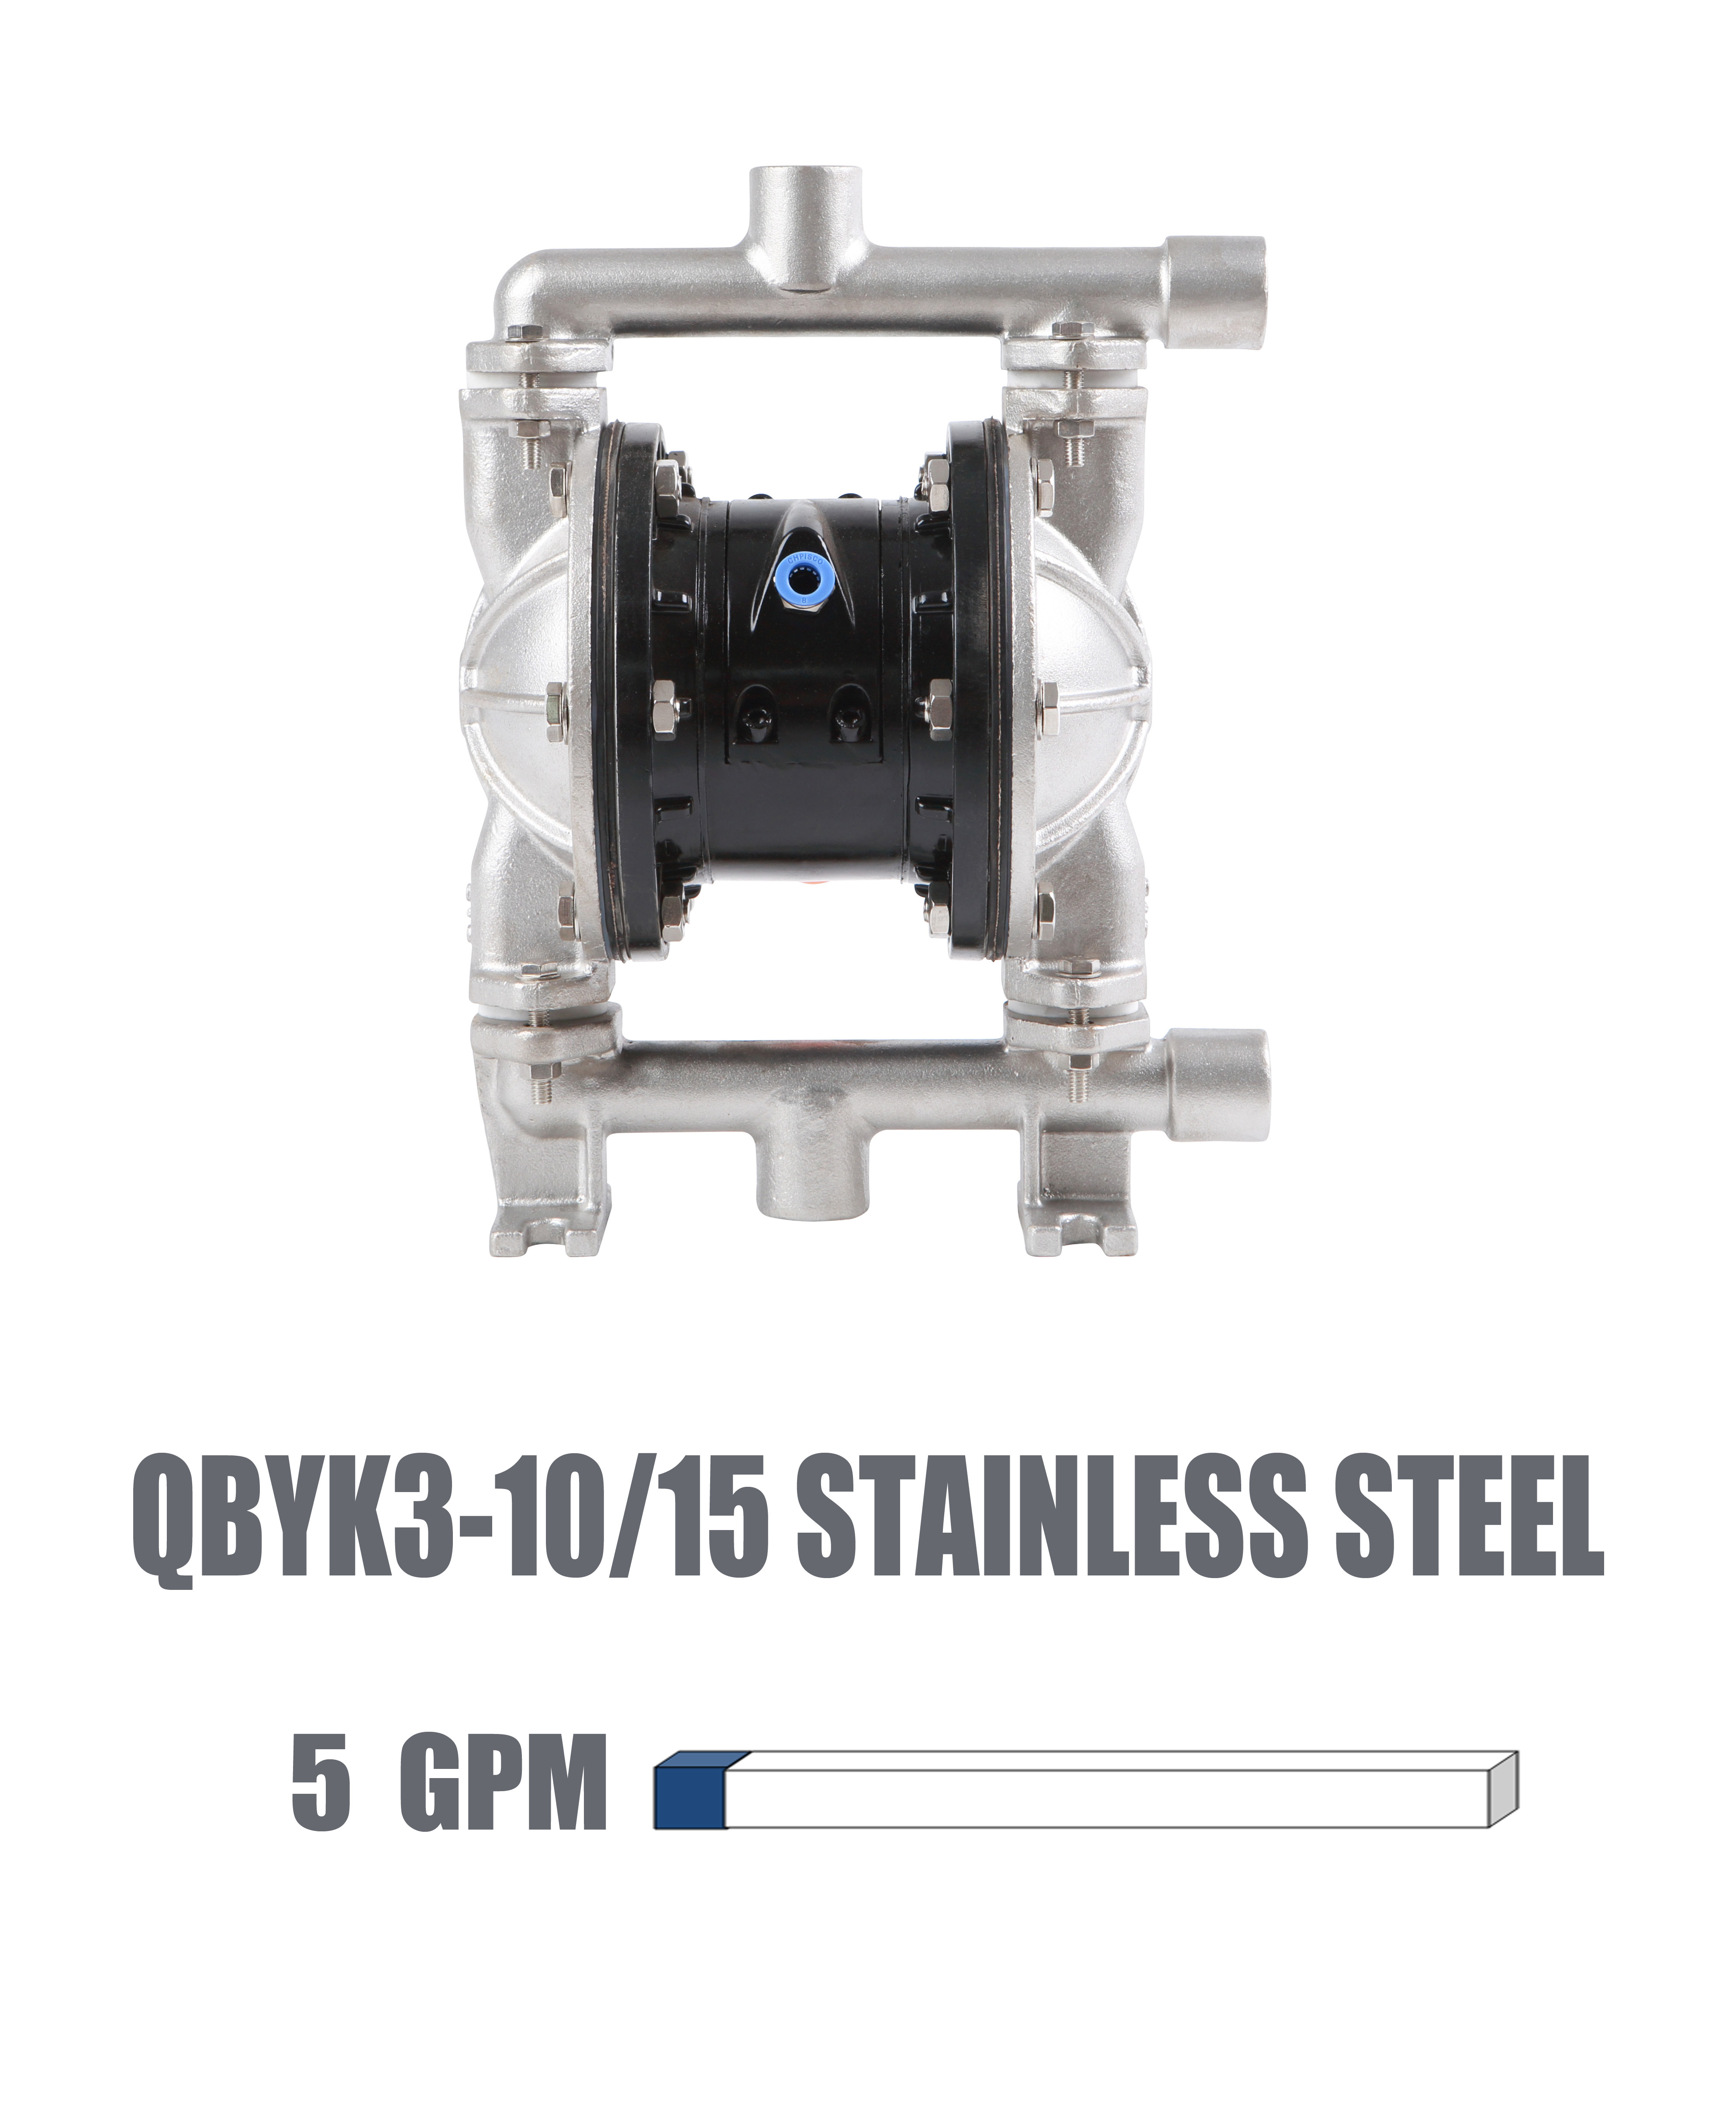 QBYK3-10/15 Stainless steel